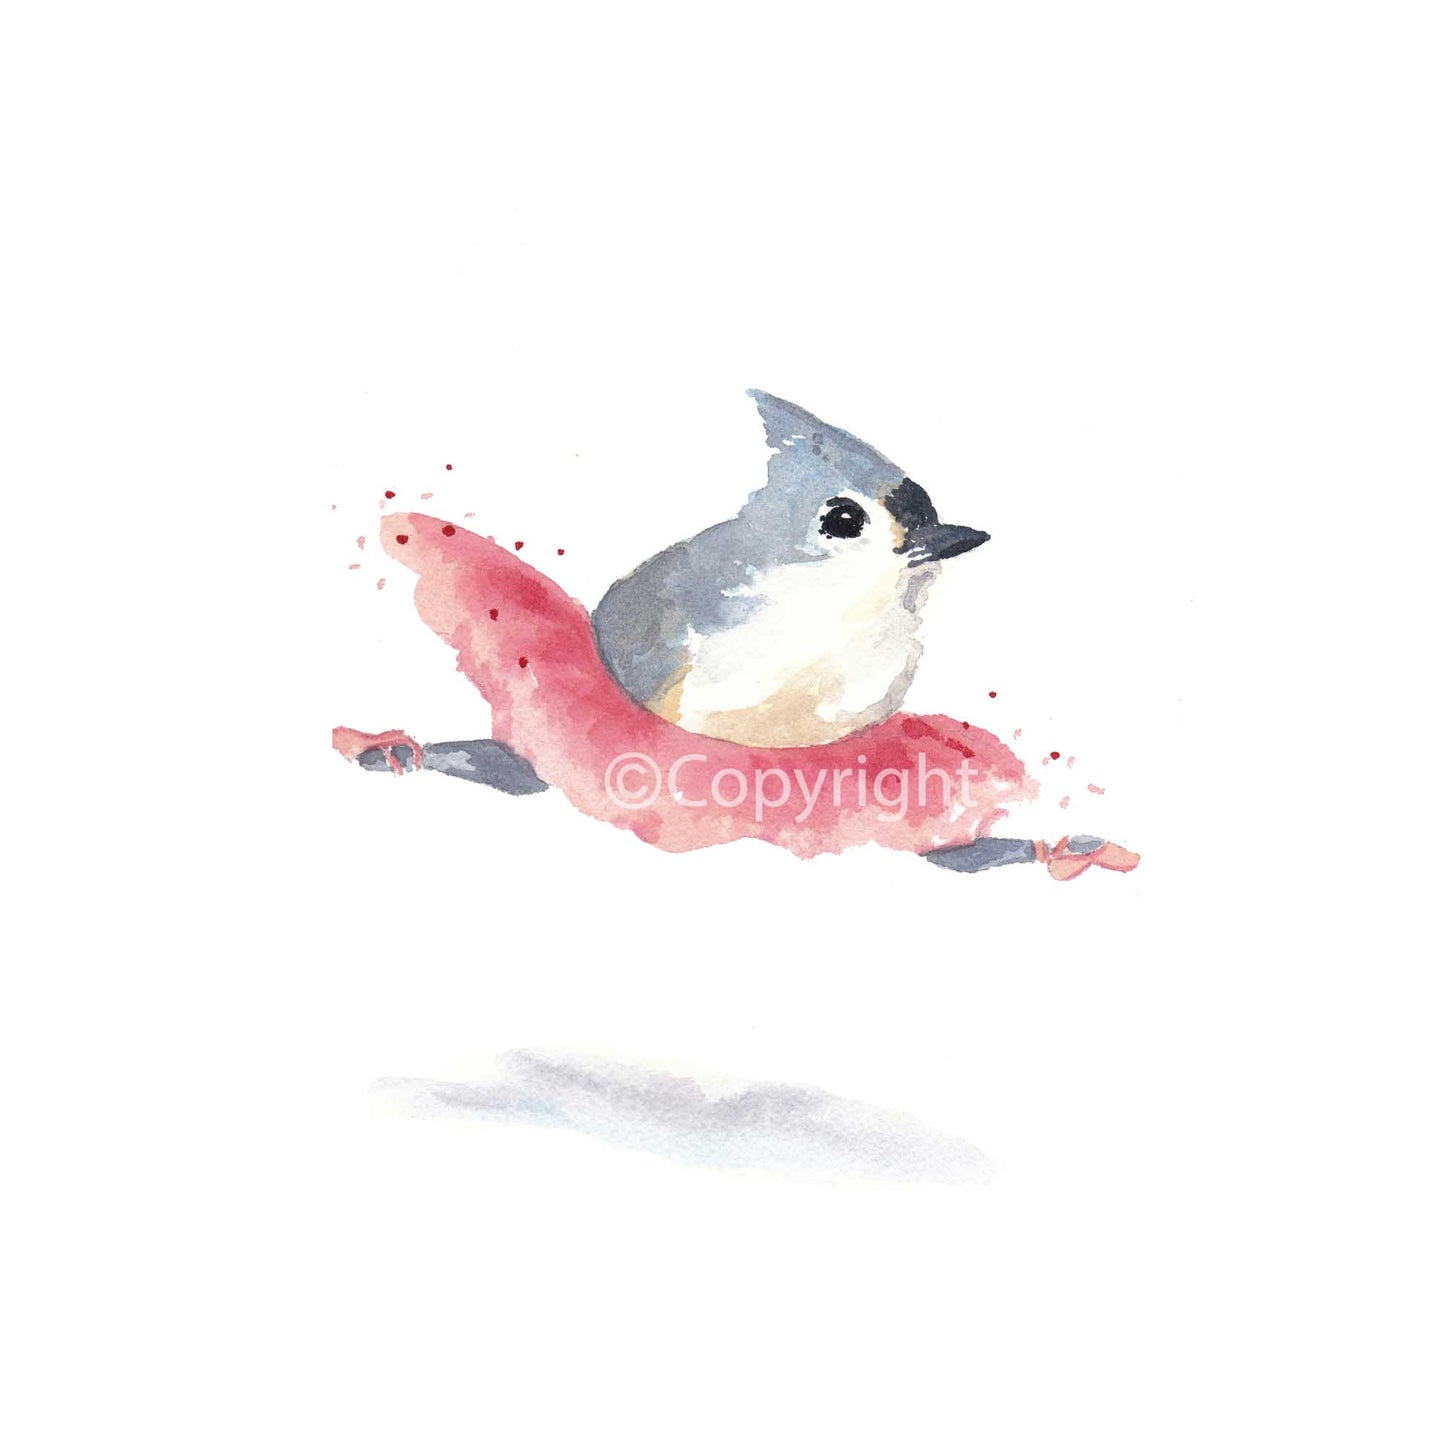 Watercolour of a leaping titmouse ballerina bird wearing a pink tutu and pointe shoes. Art by Deidre Wicks